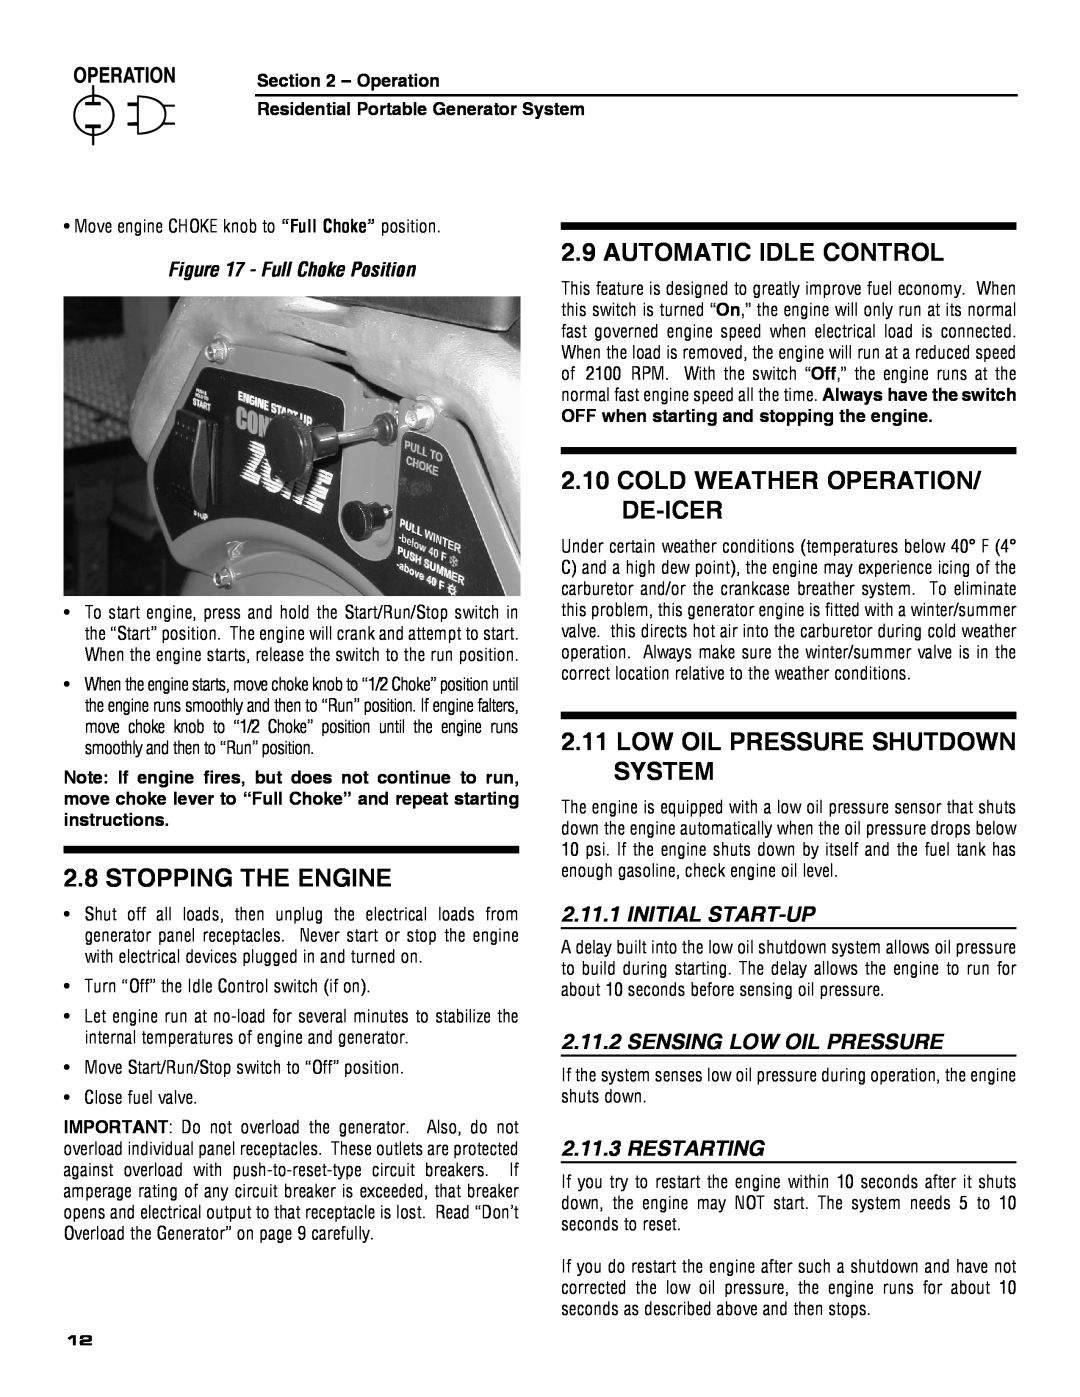 Guardian Technologies 5209 Stopping The Engine, Automatic Idle Control, Cold Weather Operation/ De-Icer, Initial Start-Up 